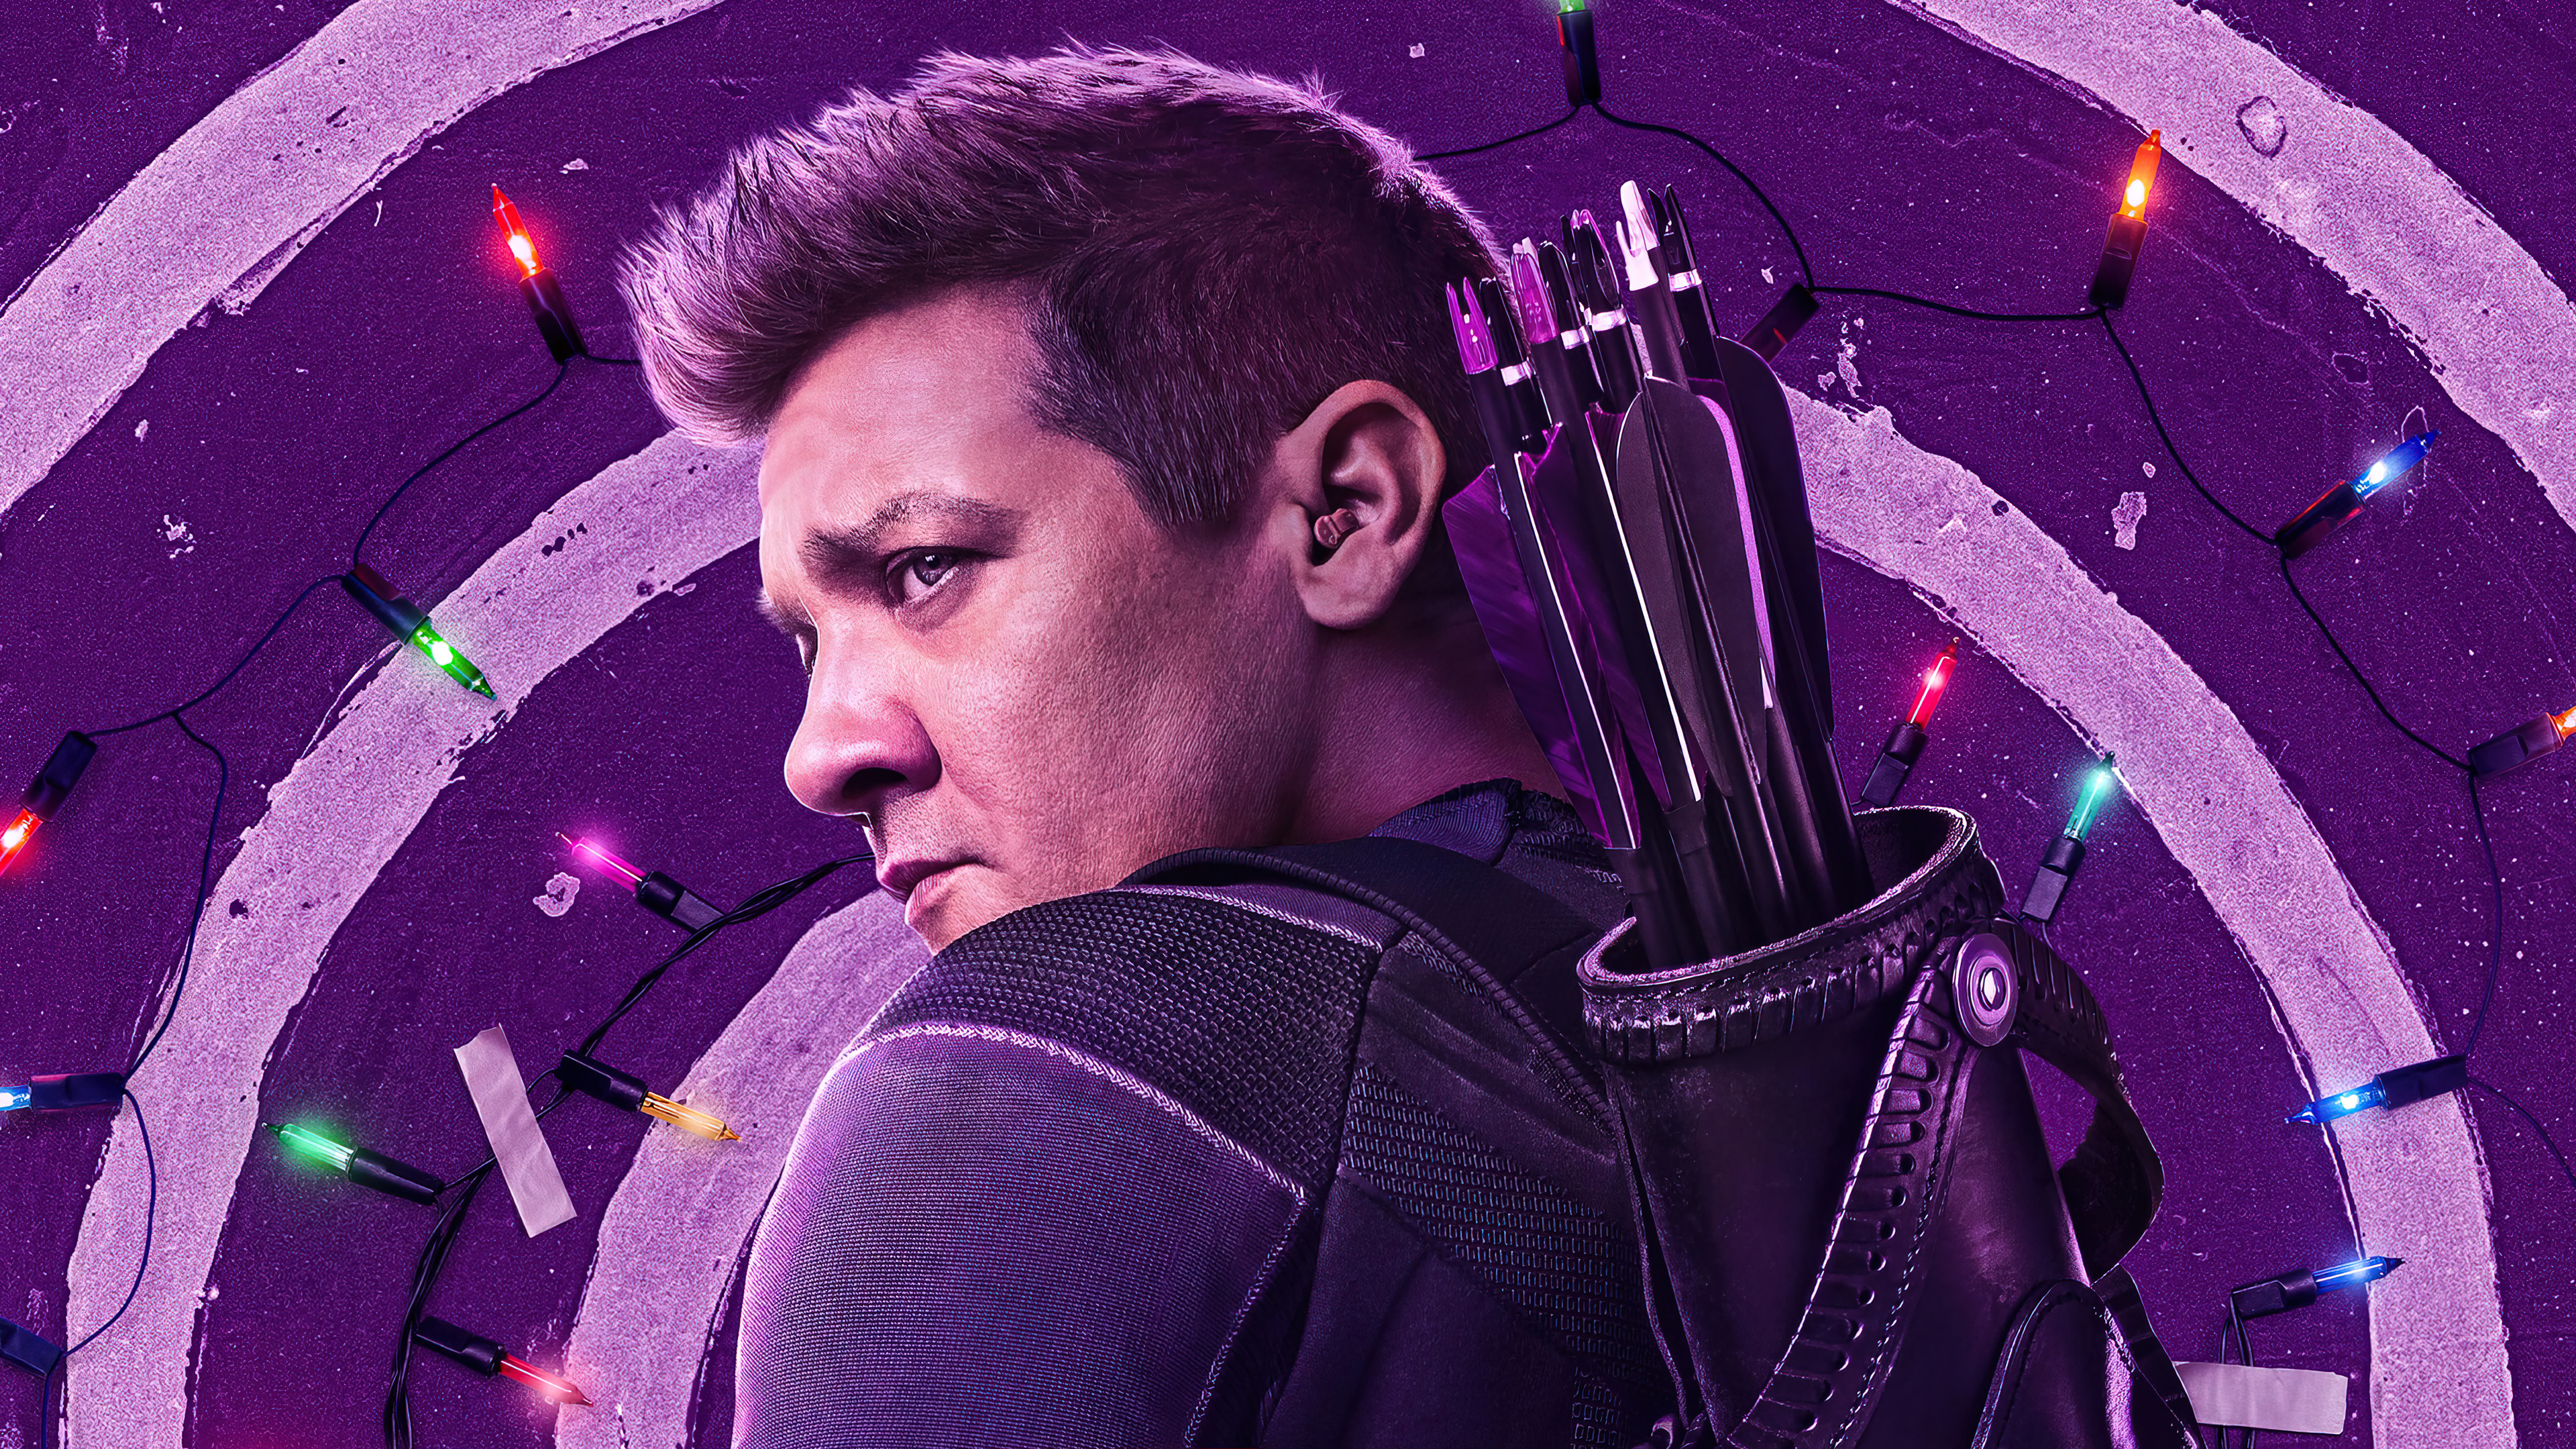 Poster Of Hawkeye 4K Wallpapers